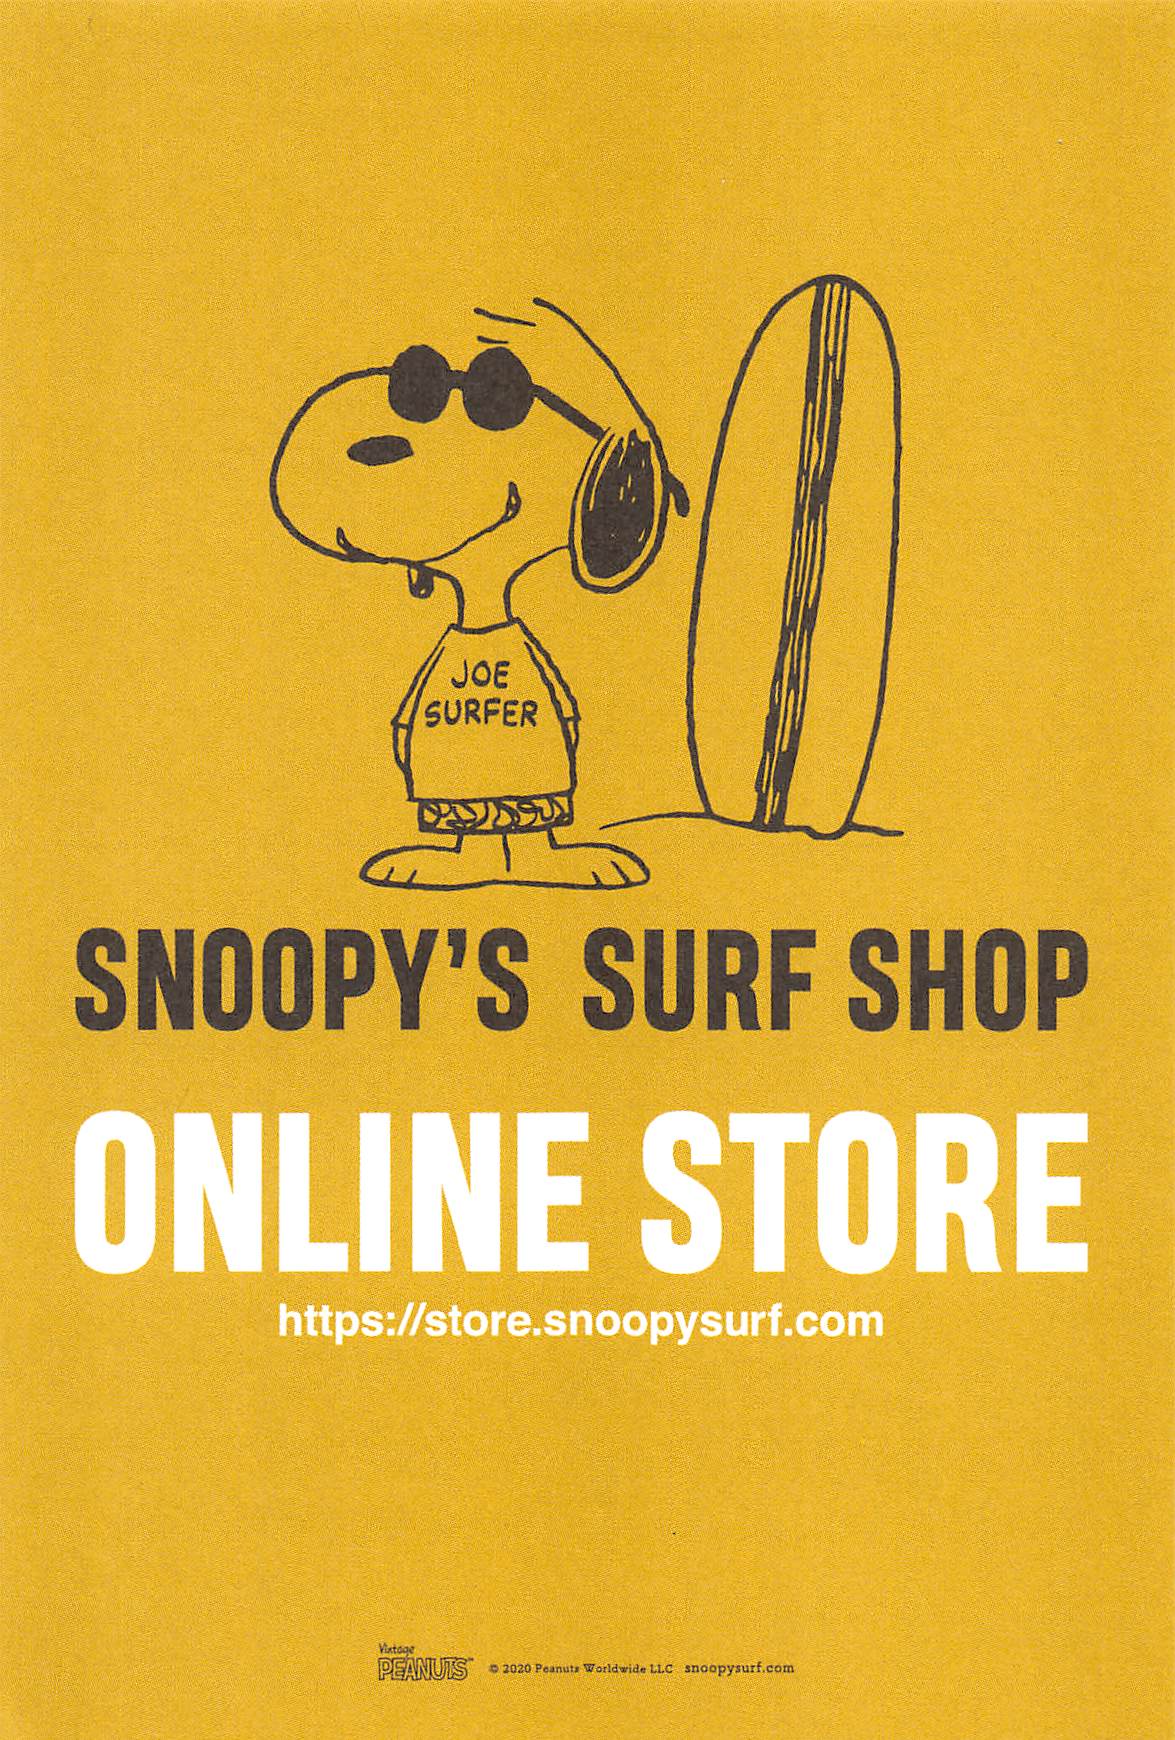 USA – Snoopy's Surf Shop Online Store – MY PEANUTS GANG AND SNOOPY